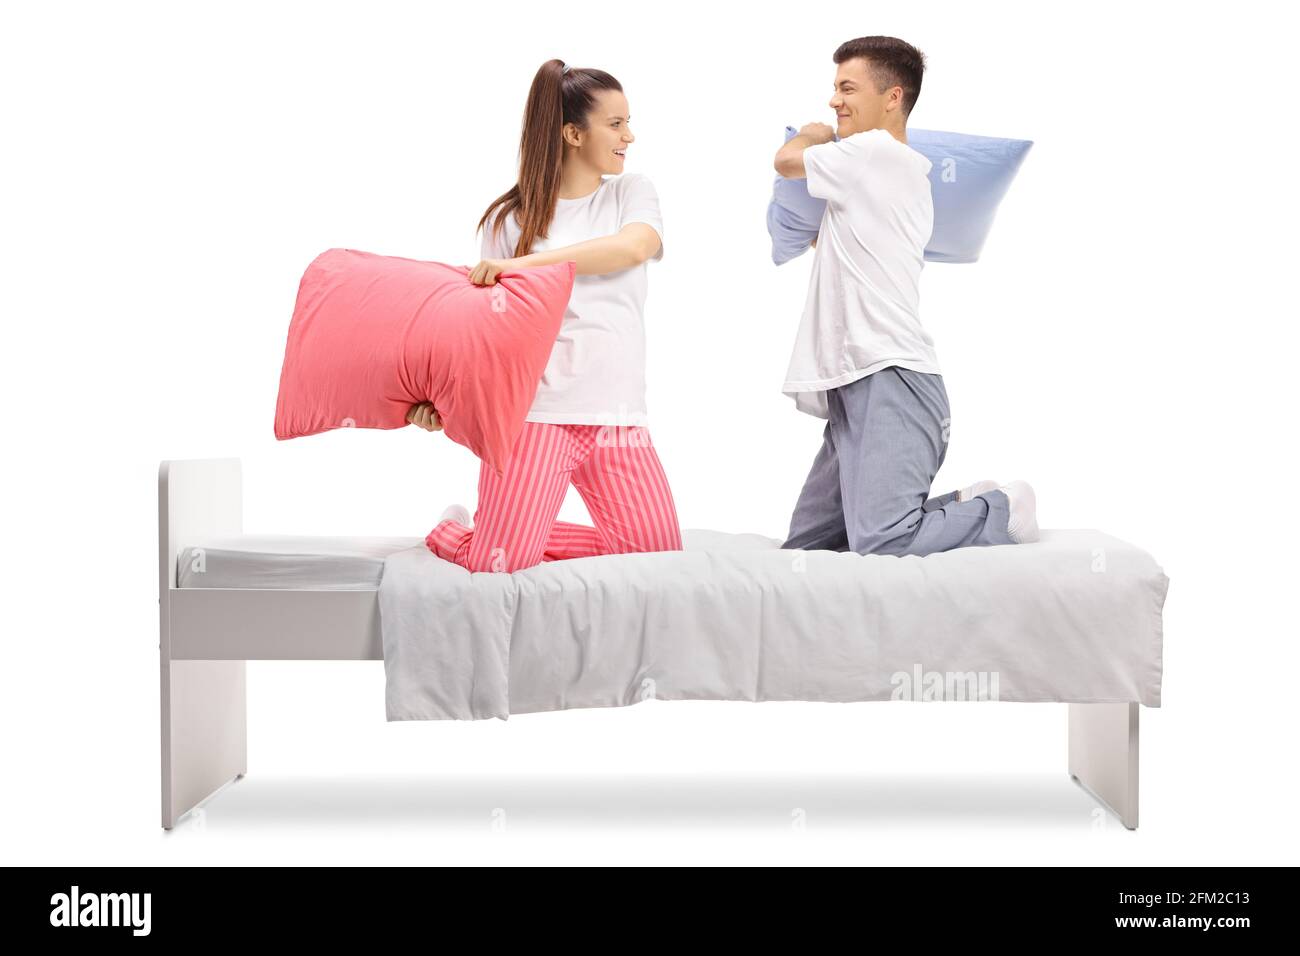 Young man and woman in pajamas fighting with pillows on a bed isolated on white background Stock Photo